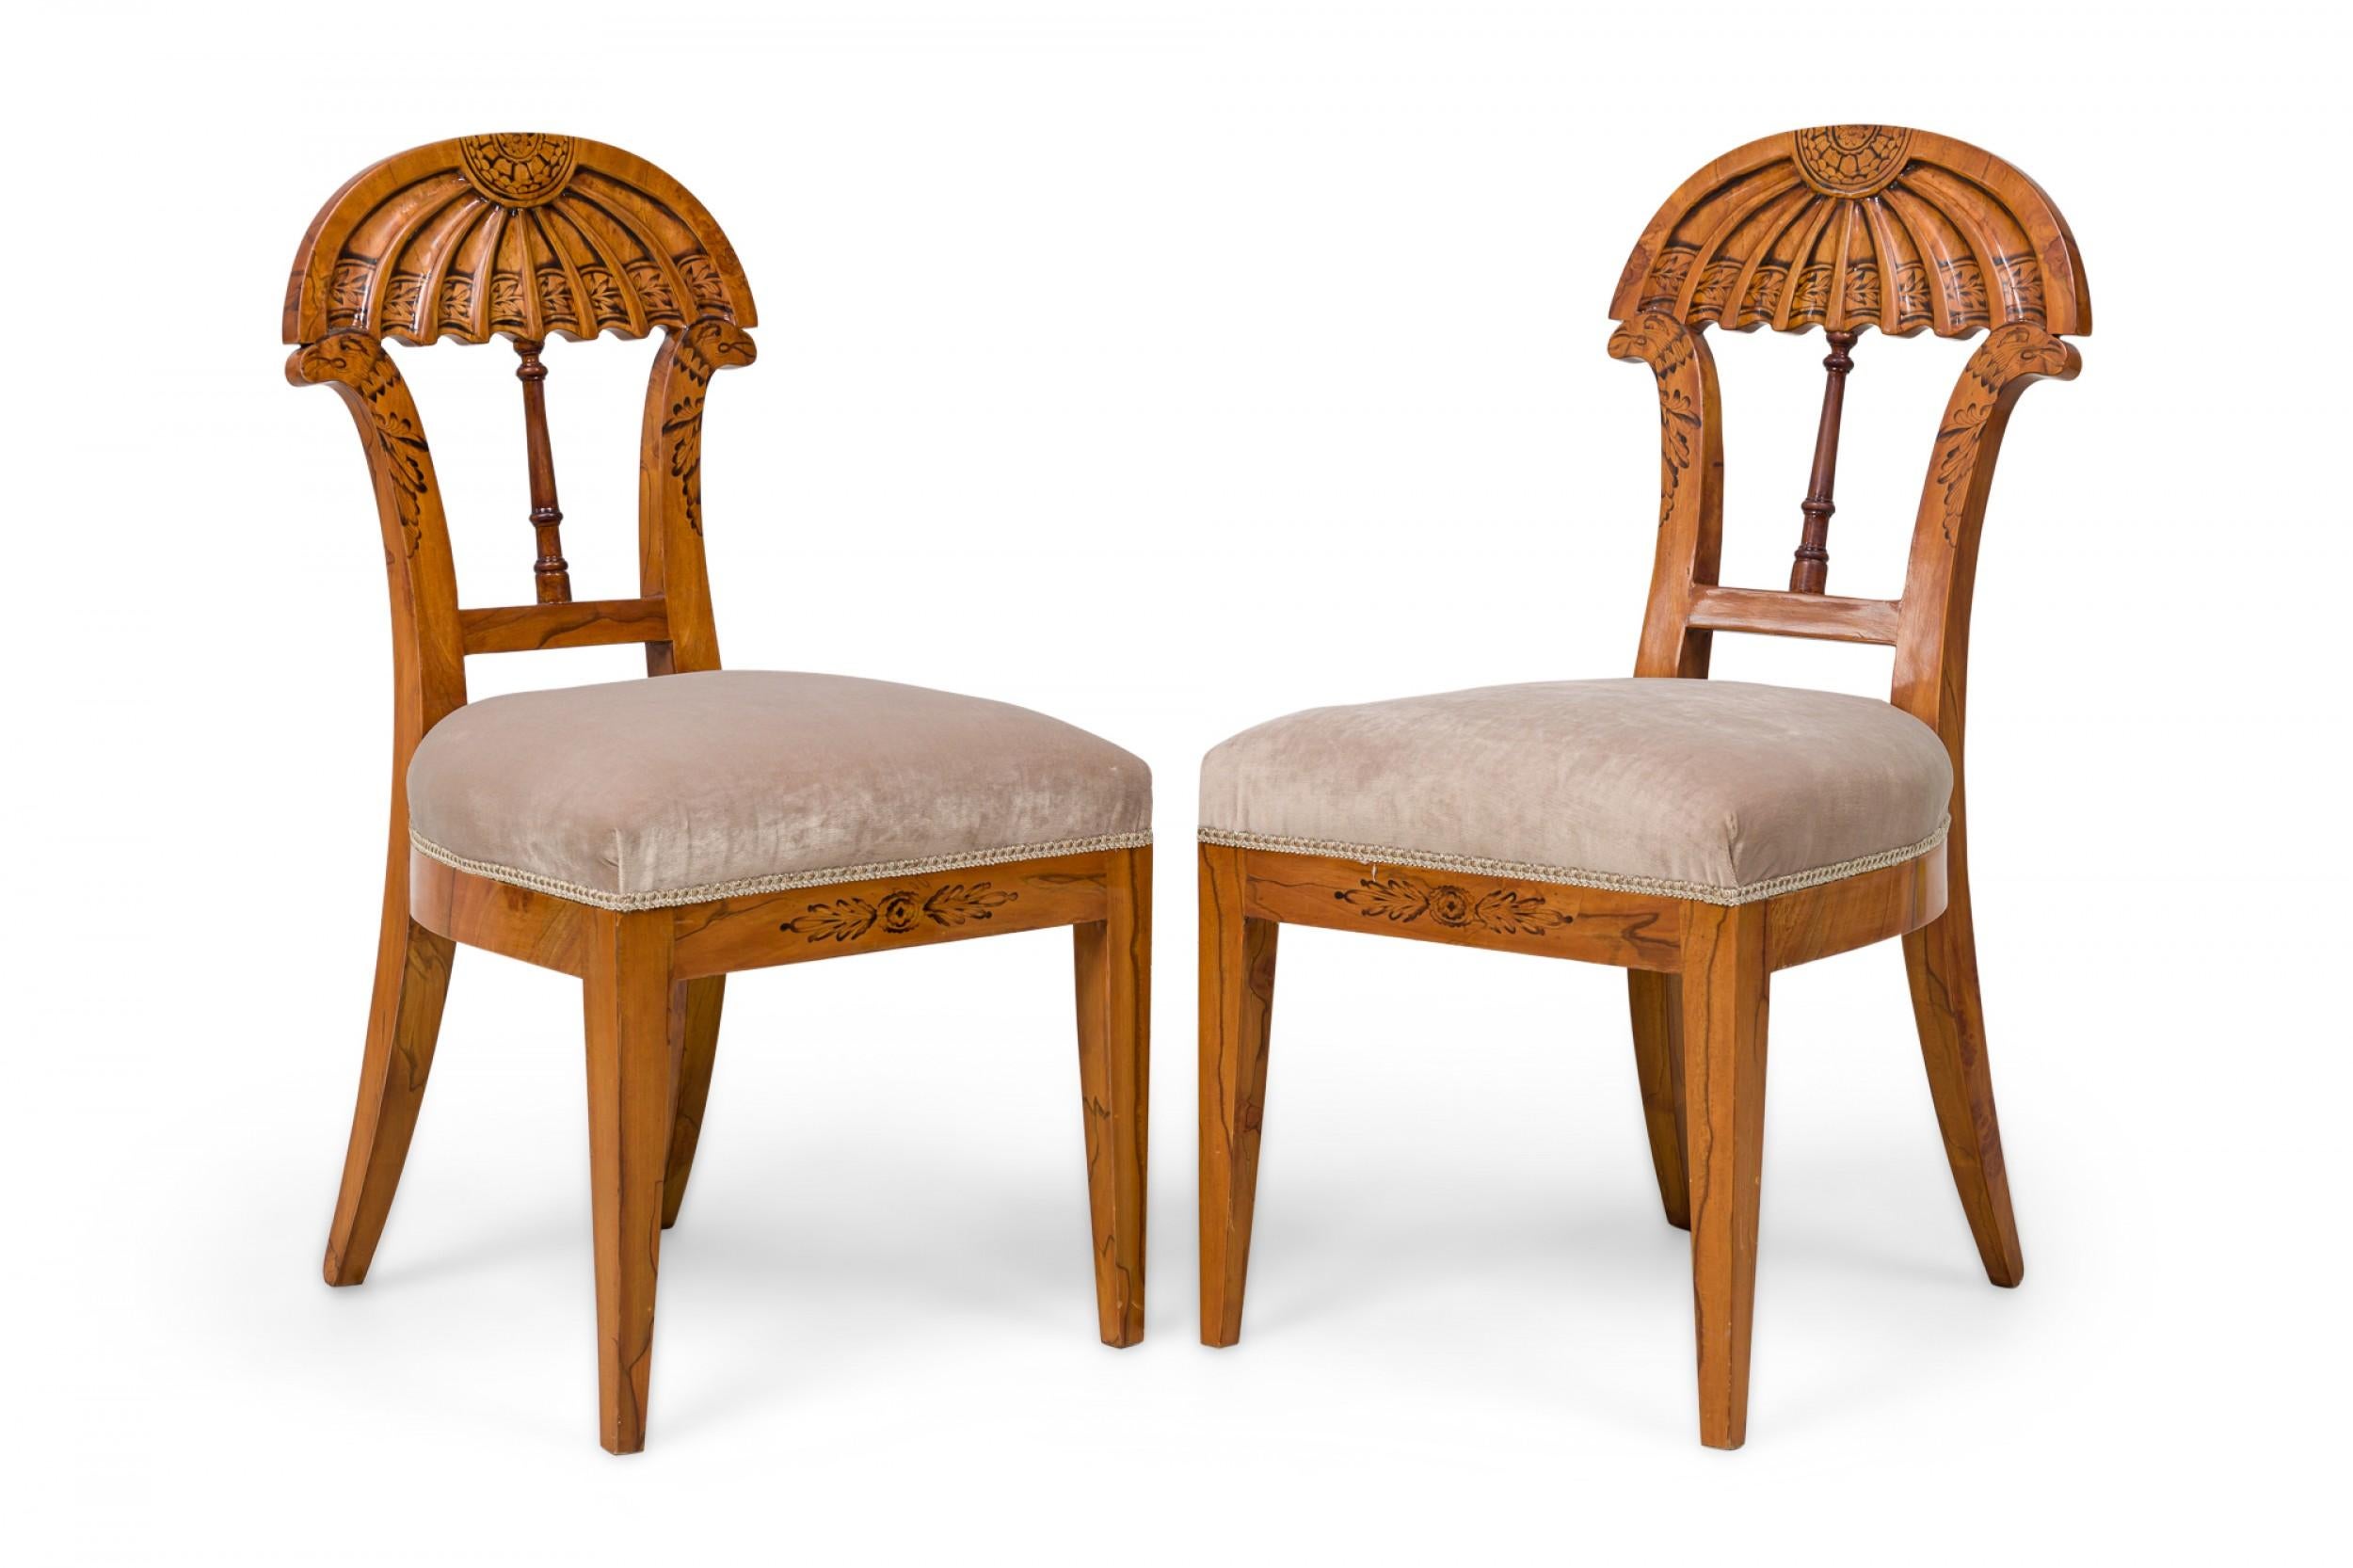 SET of 9 Biedermeier Viennese (19th Century) dining / side chairs featuring carved arch backs in fluted form and bird\'s head supports decorated with polychrome embellishments, a balustrade center stretcher, with seats upholstered in pastel velvet